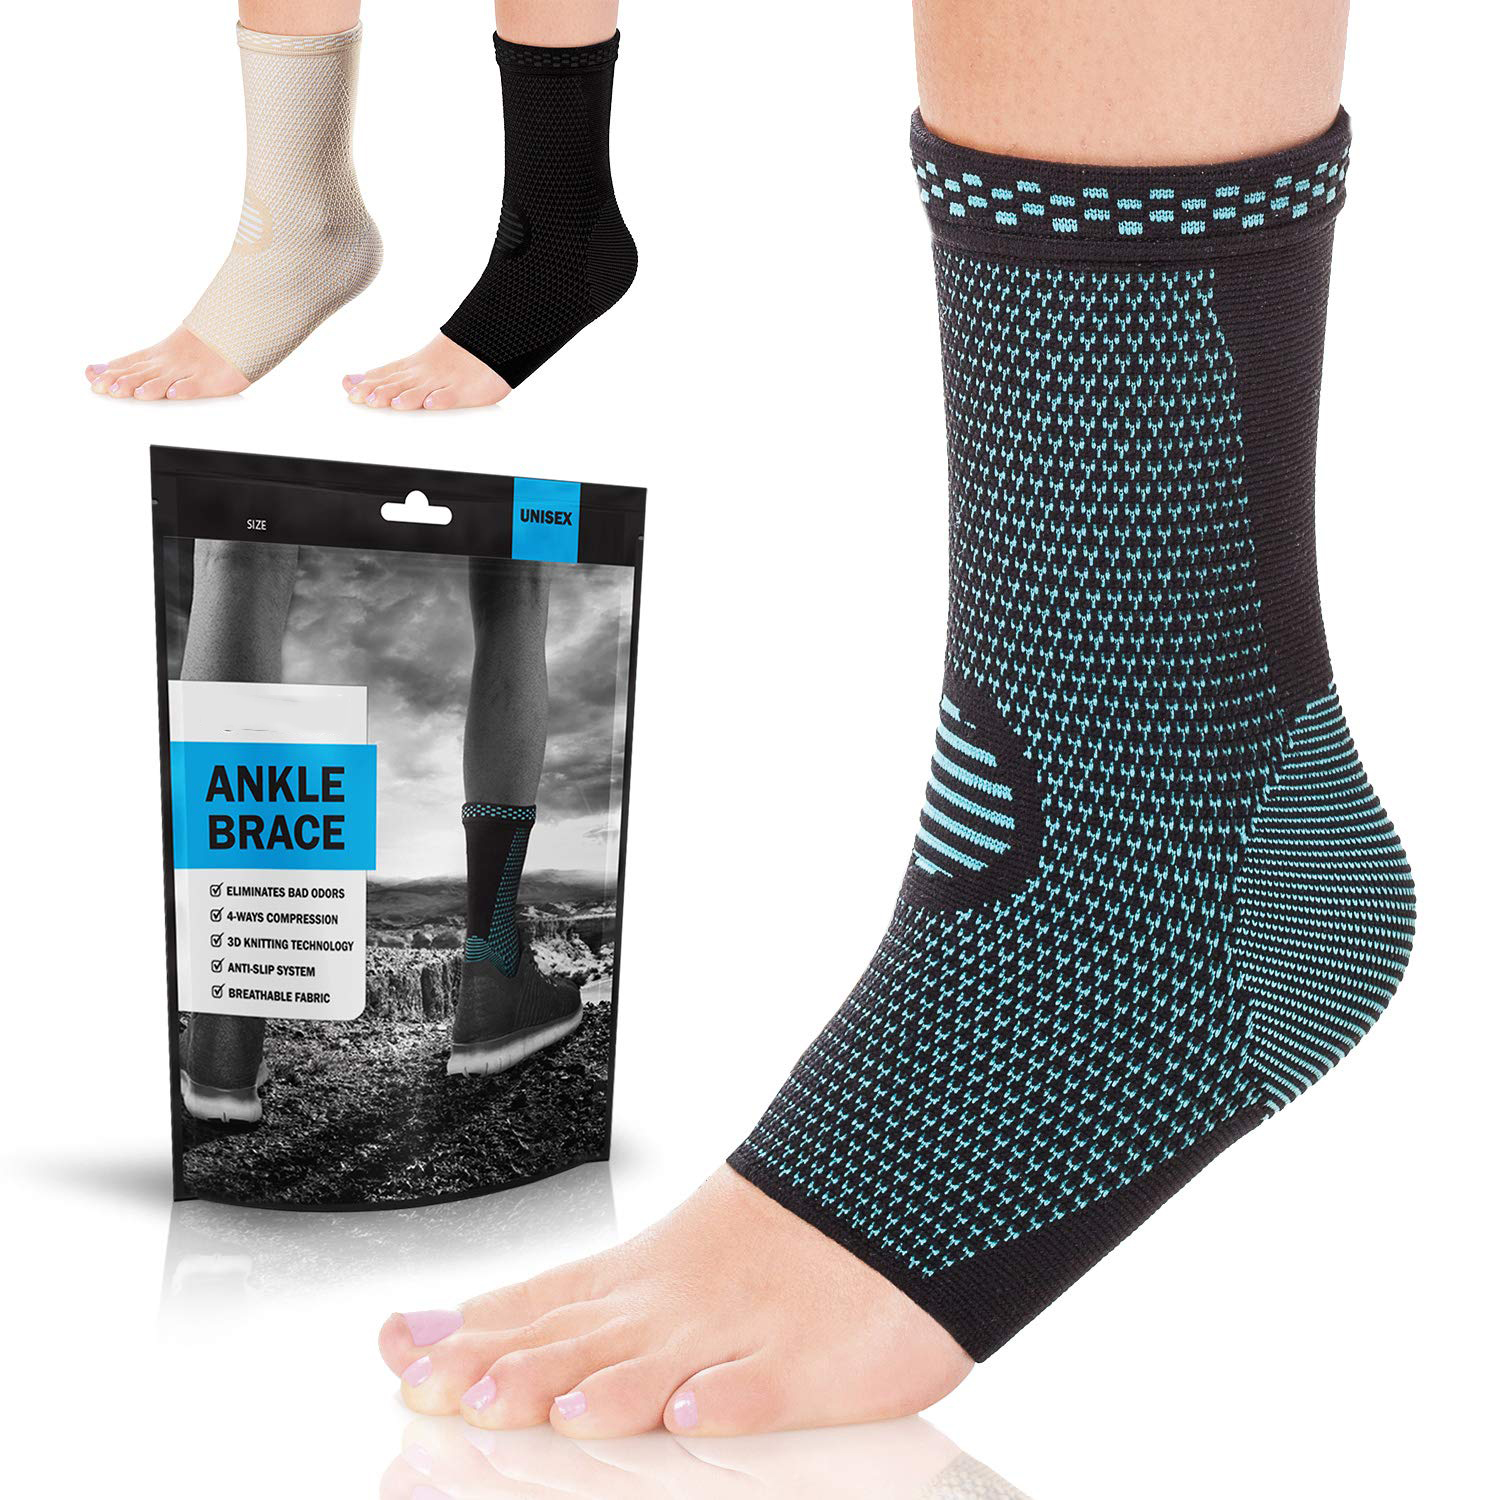 Hot Sale for Elbow Sleeve - Ankle Brace Compression Support Sleeve (Pair) for Injury Recovery, Joint Pain and More. Achilles Tendon Support, Plantar Fasciitis Foot Socks with Arch Support, Eases S...